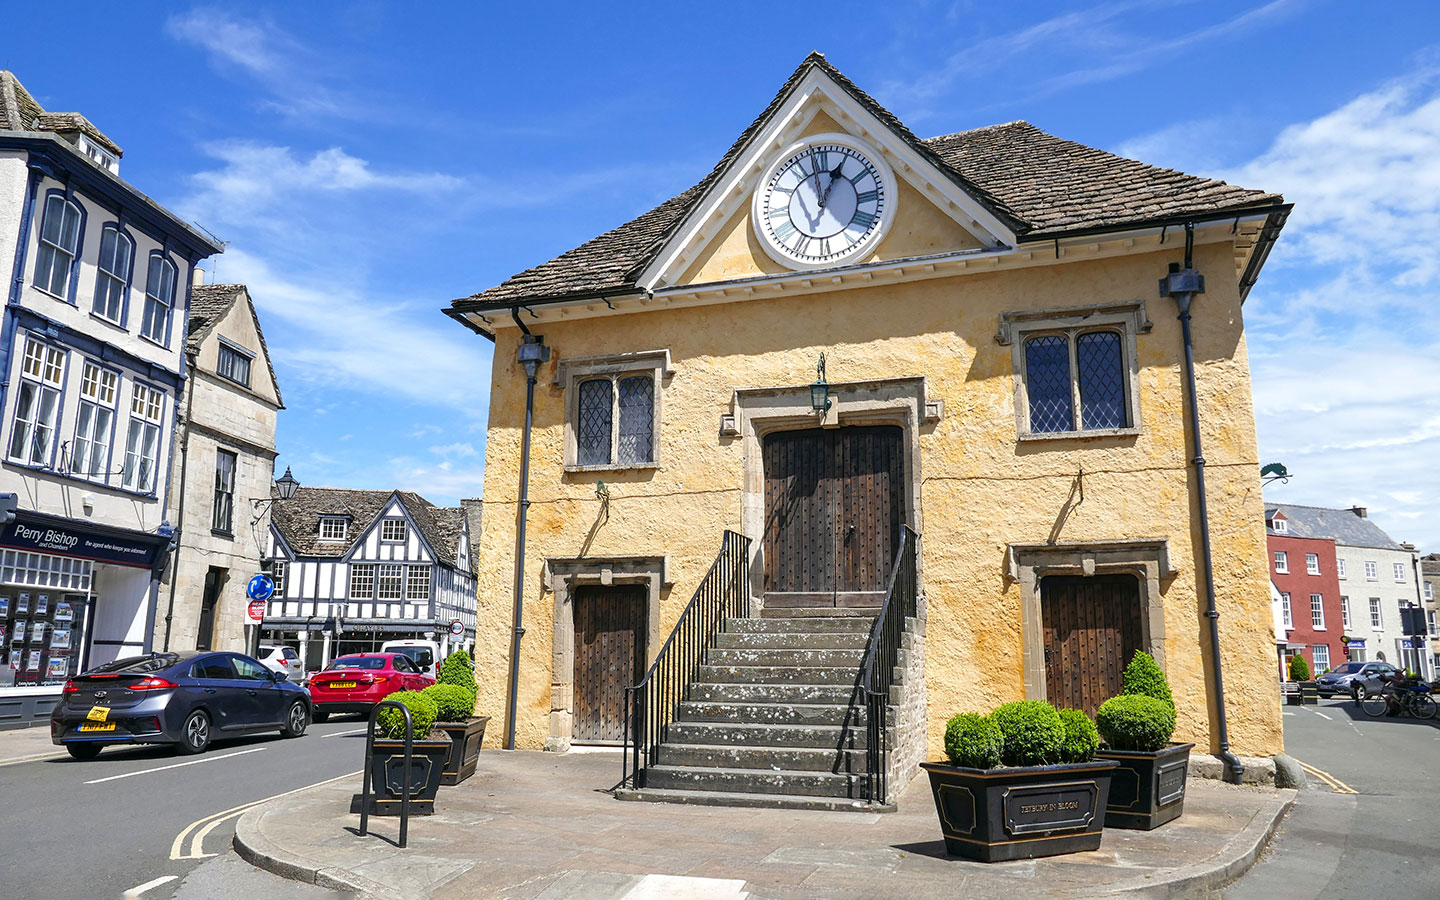 Visiting Tetbury: A local's guide